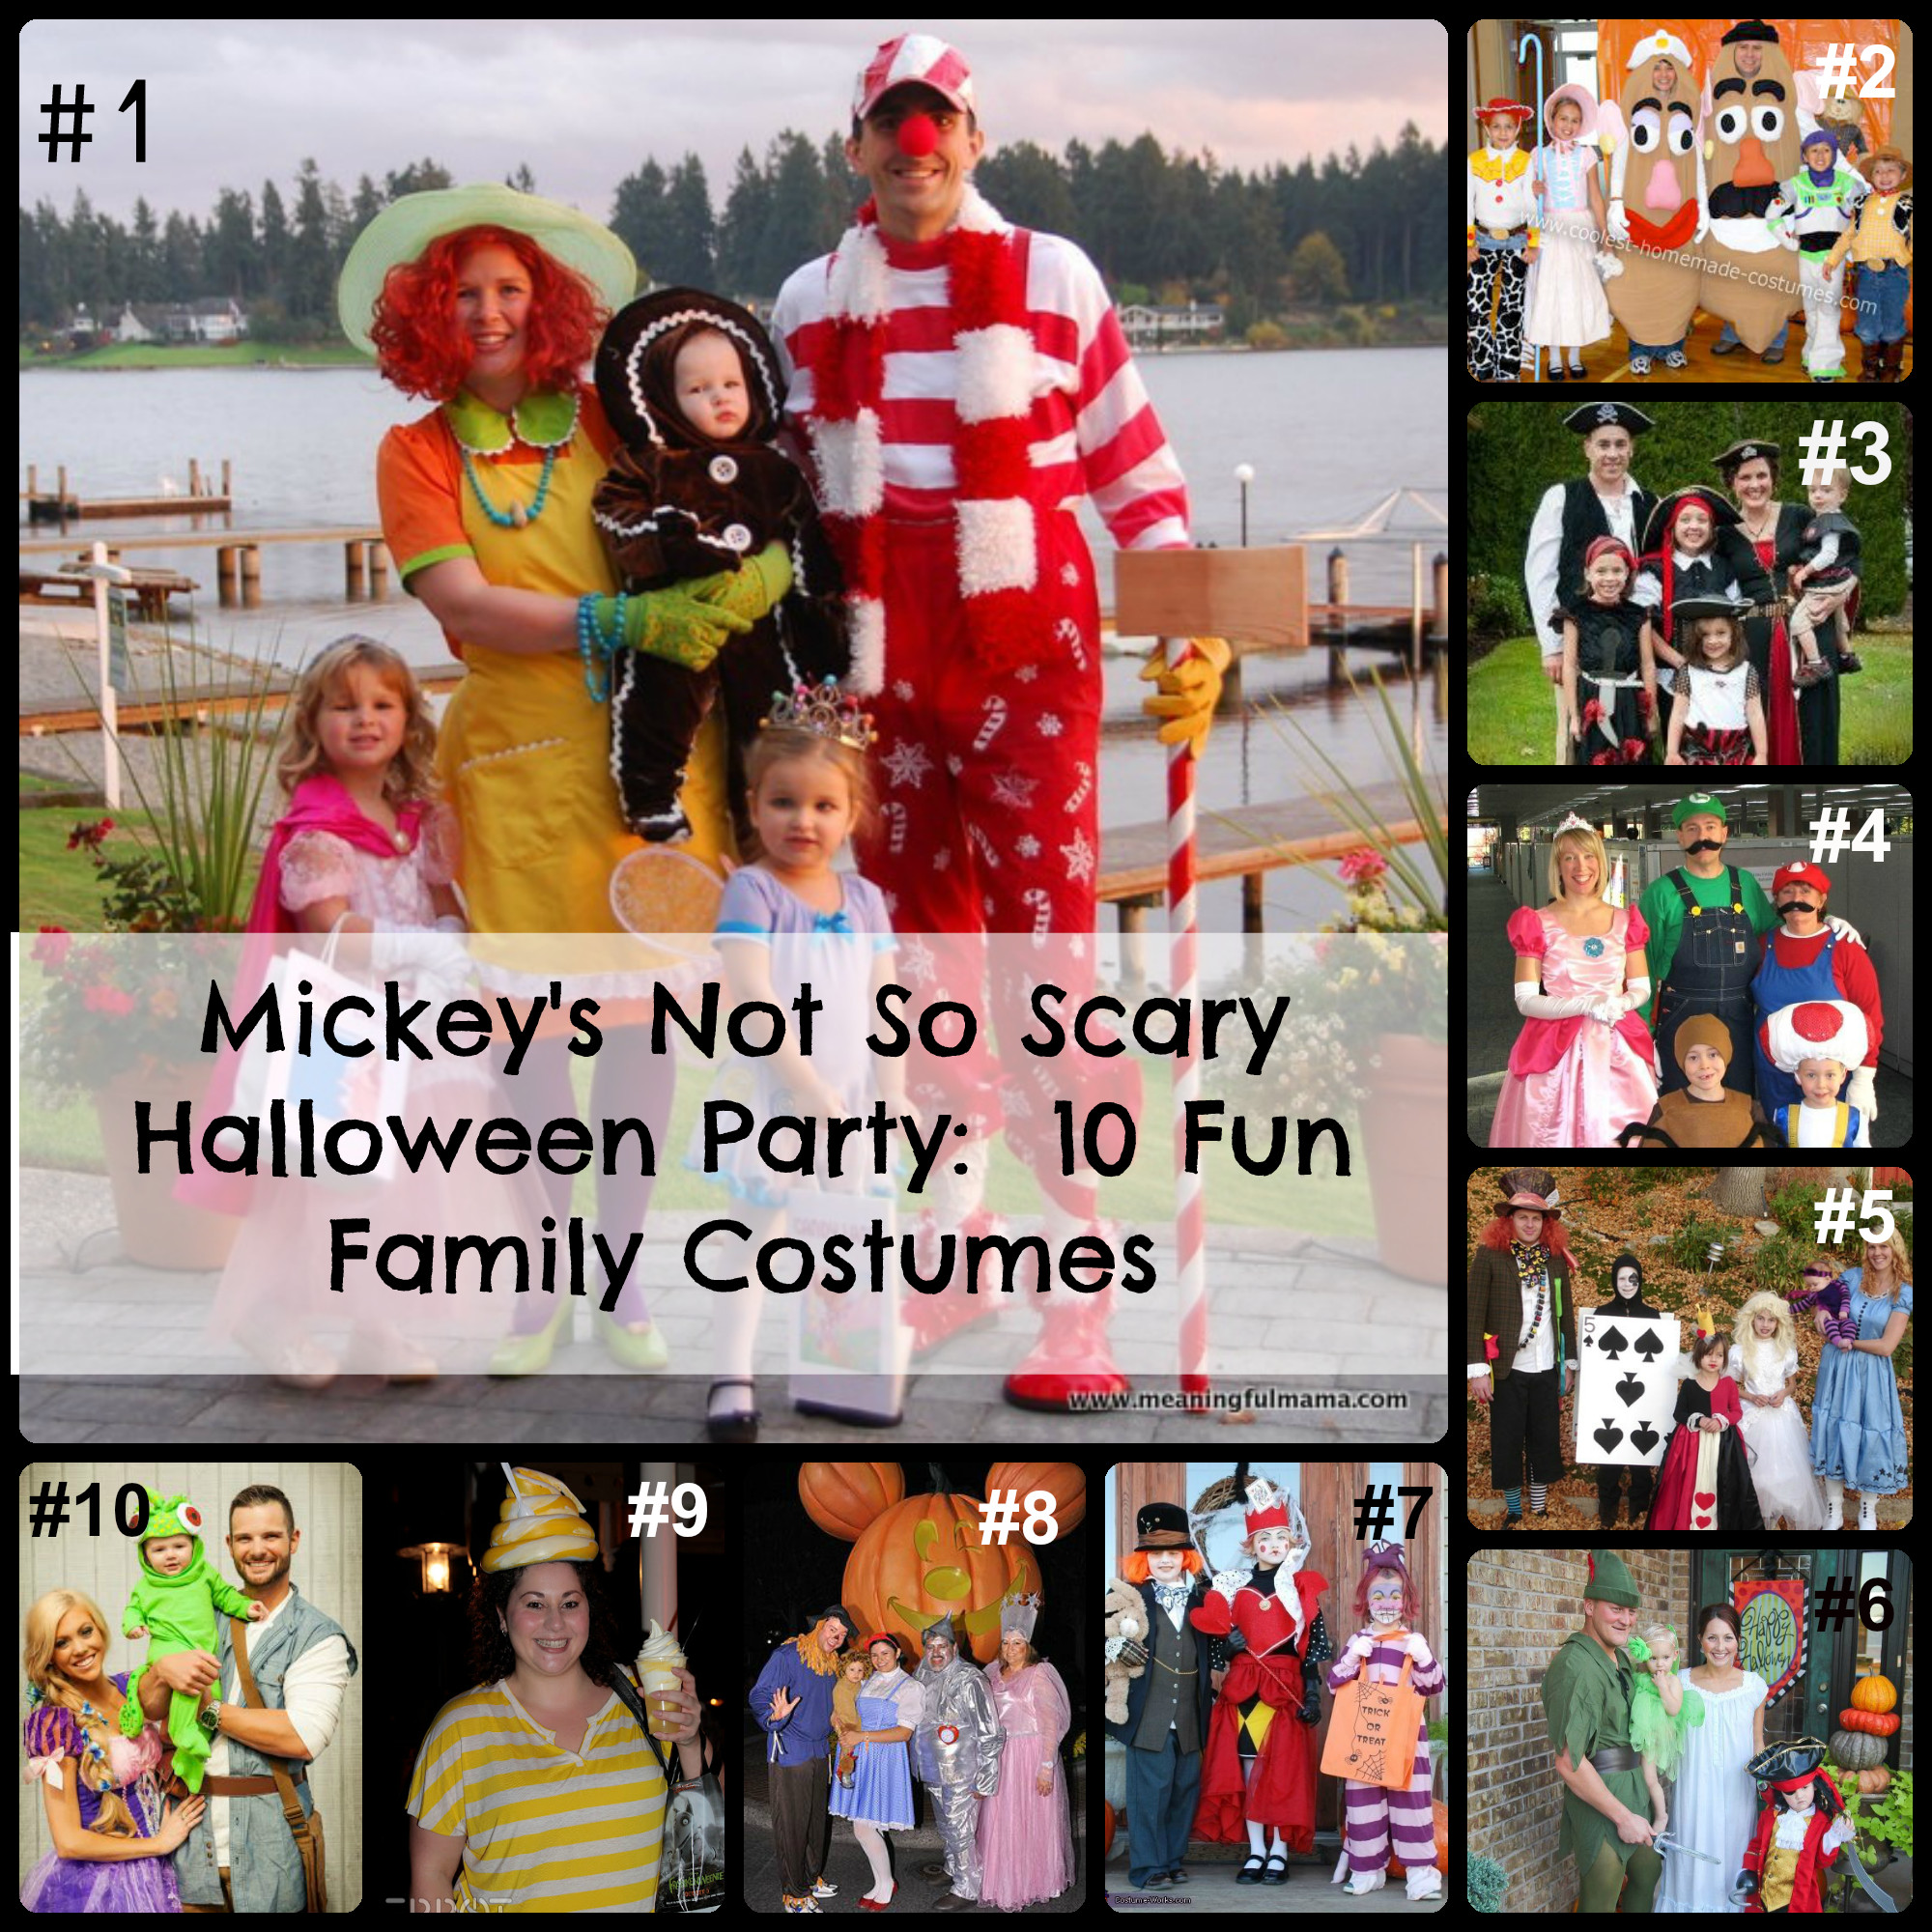 Mickey Not So Scary Halloween Party Costume Ideas
 Mickey s Not So Scary Halloween Party 10 Fun Family